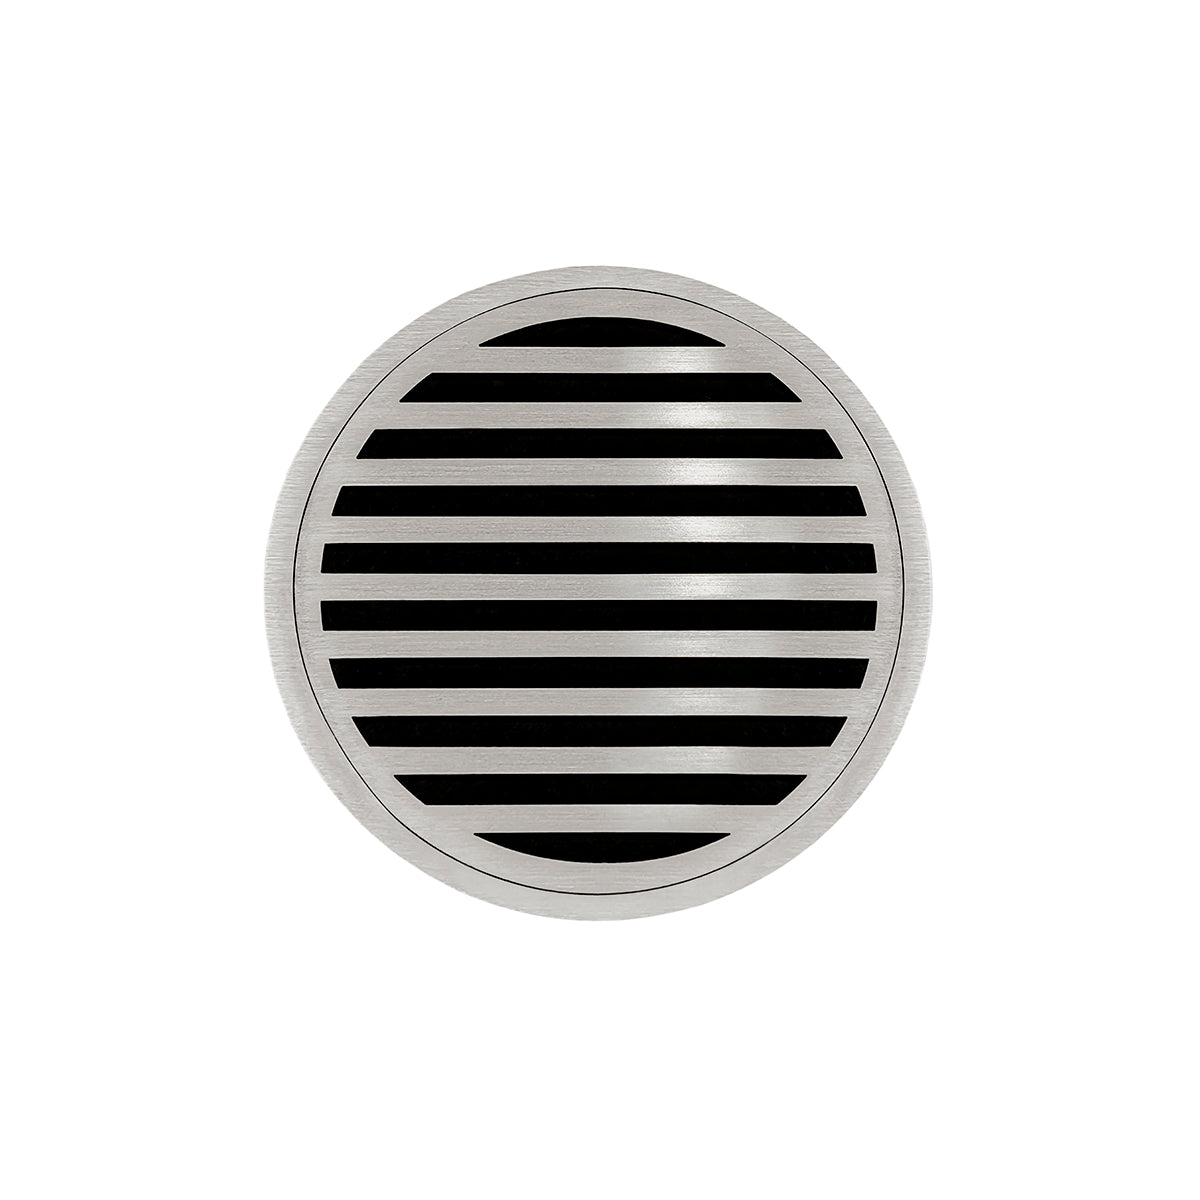 Infinity Drain 5" Round RND 5 Premium Center Drain Kit with Lines Pattern Decorative Plate with PVC Drain Body, 2" Outlet